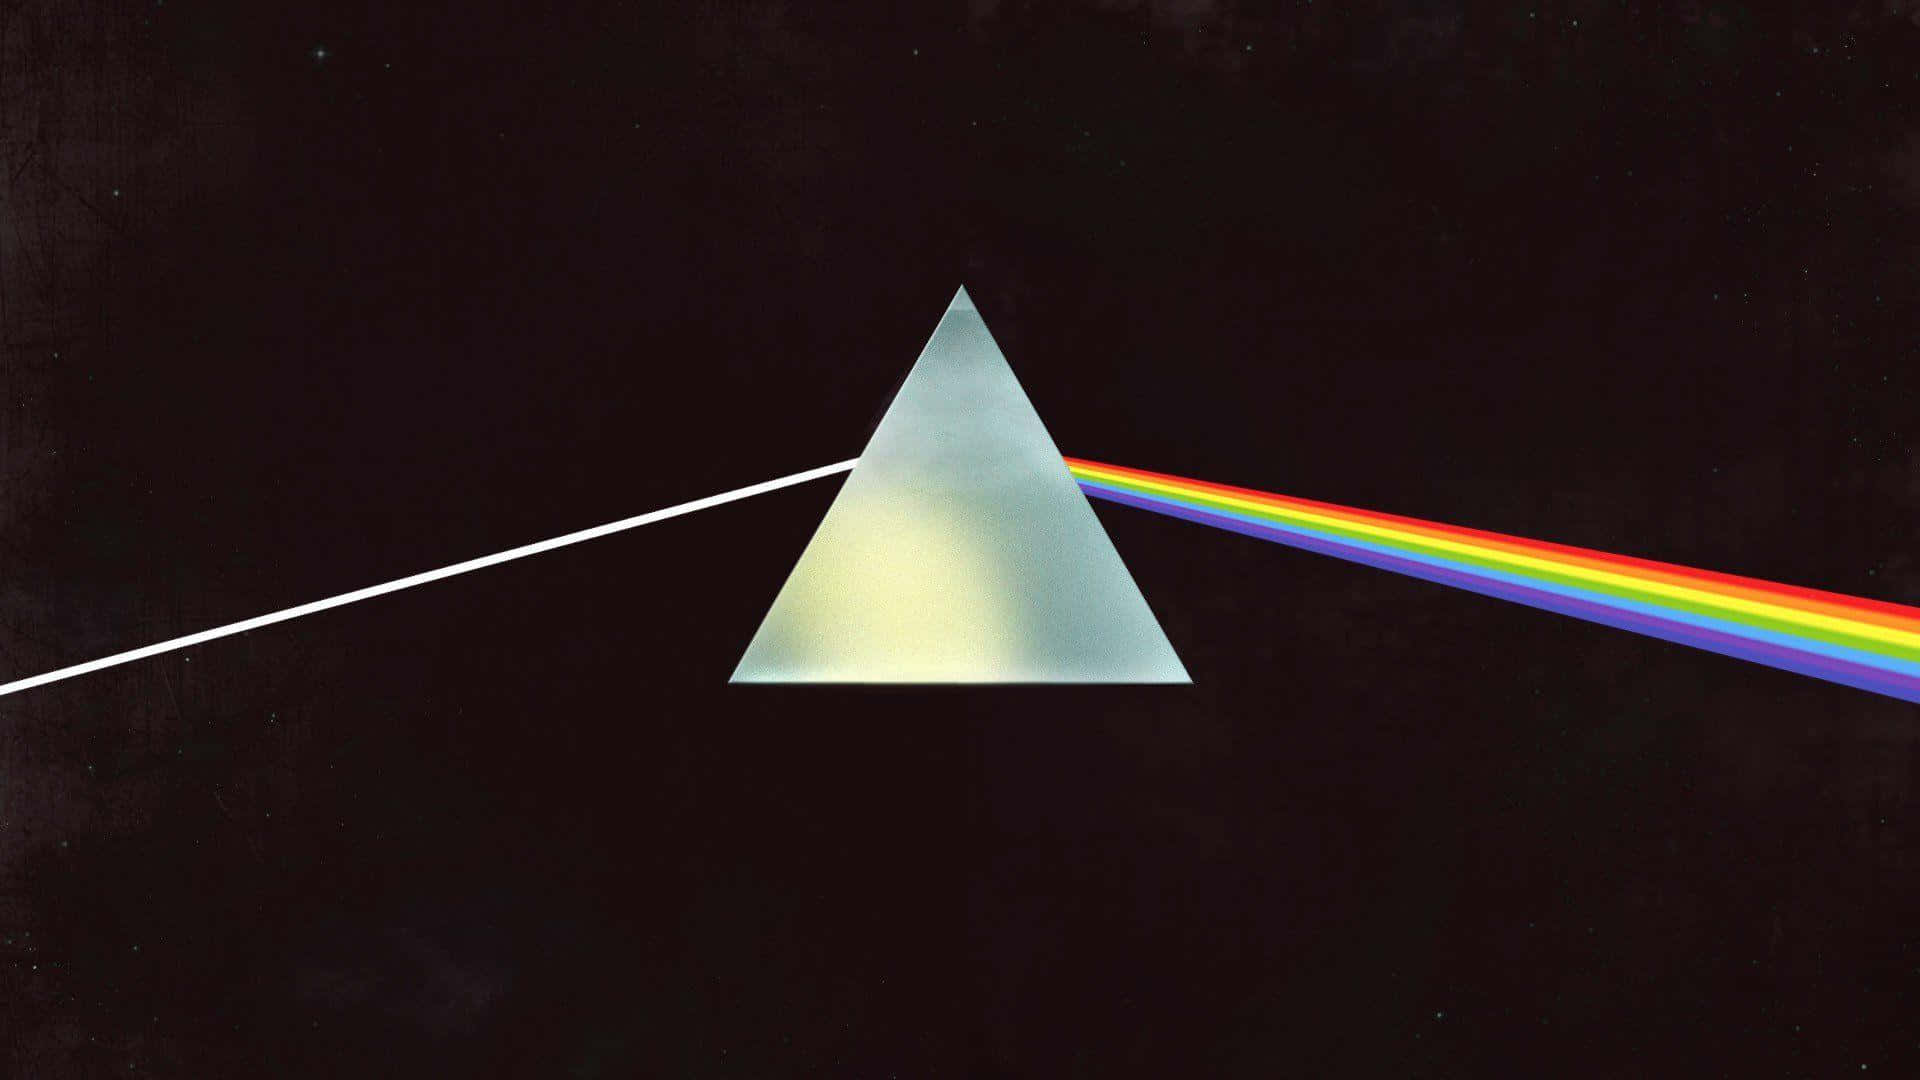 Image  The Dark Side of the Moon Wallpaper